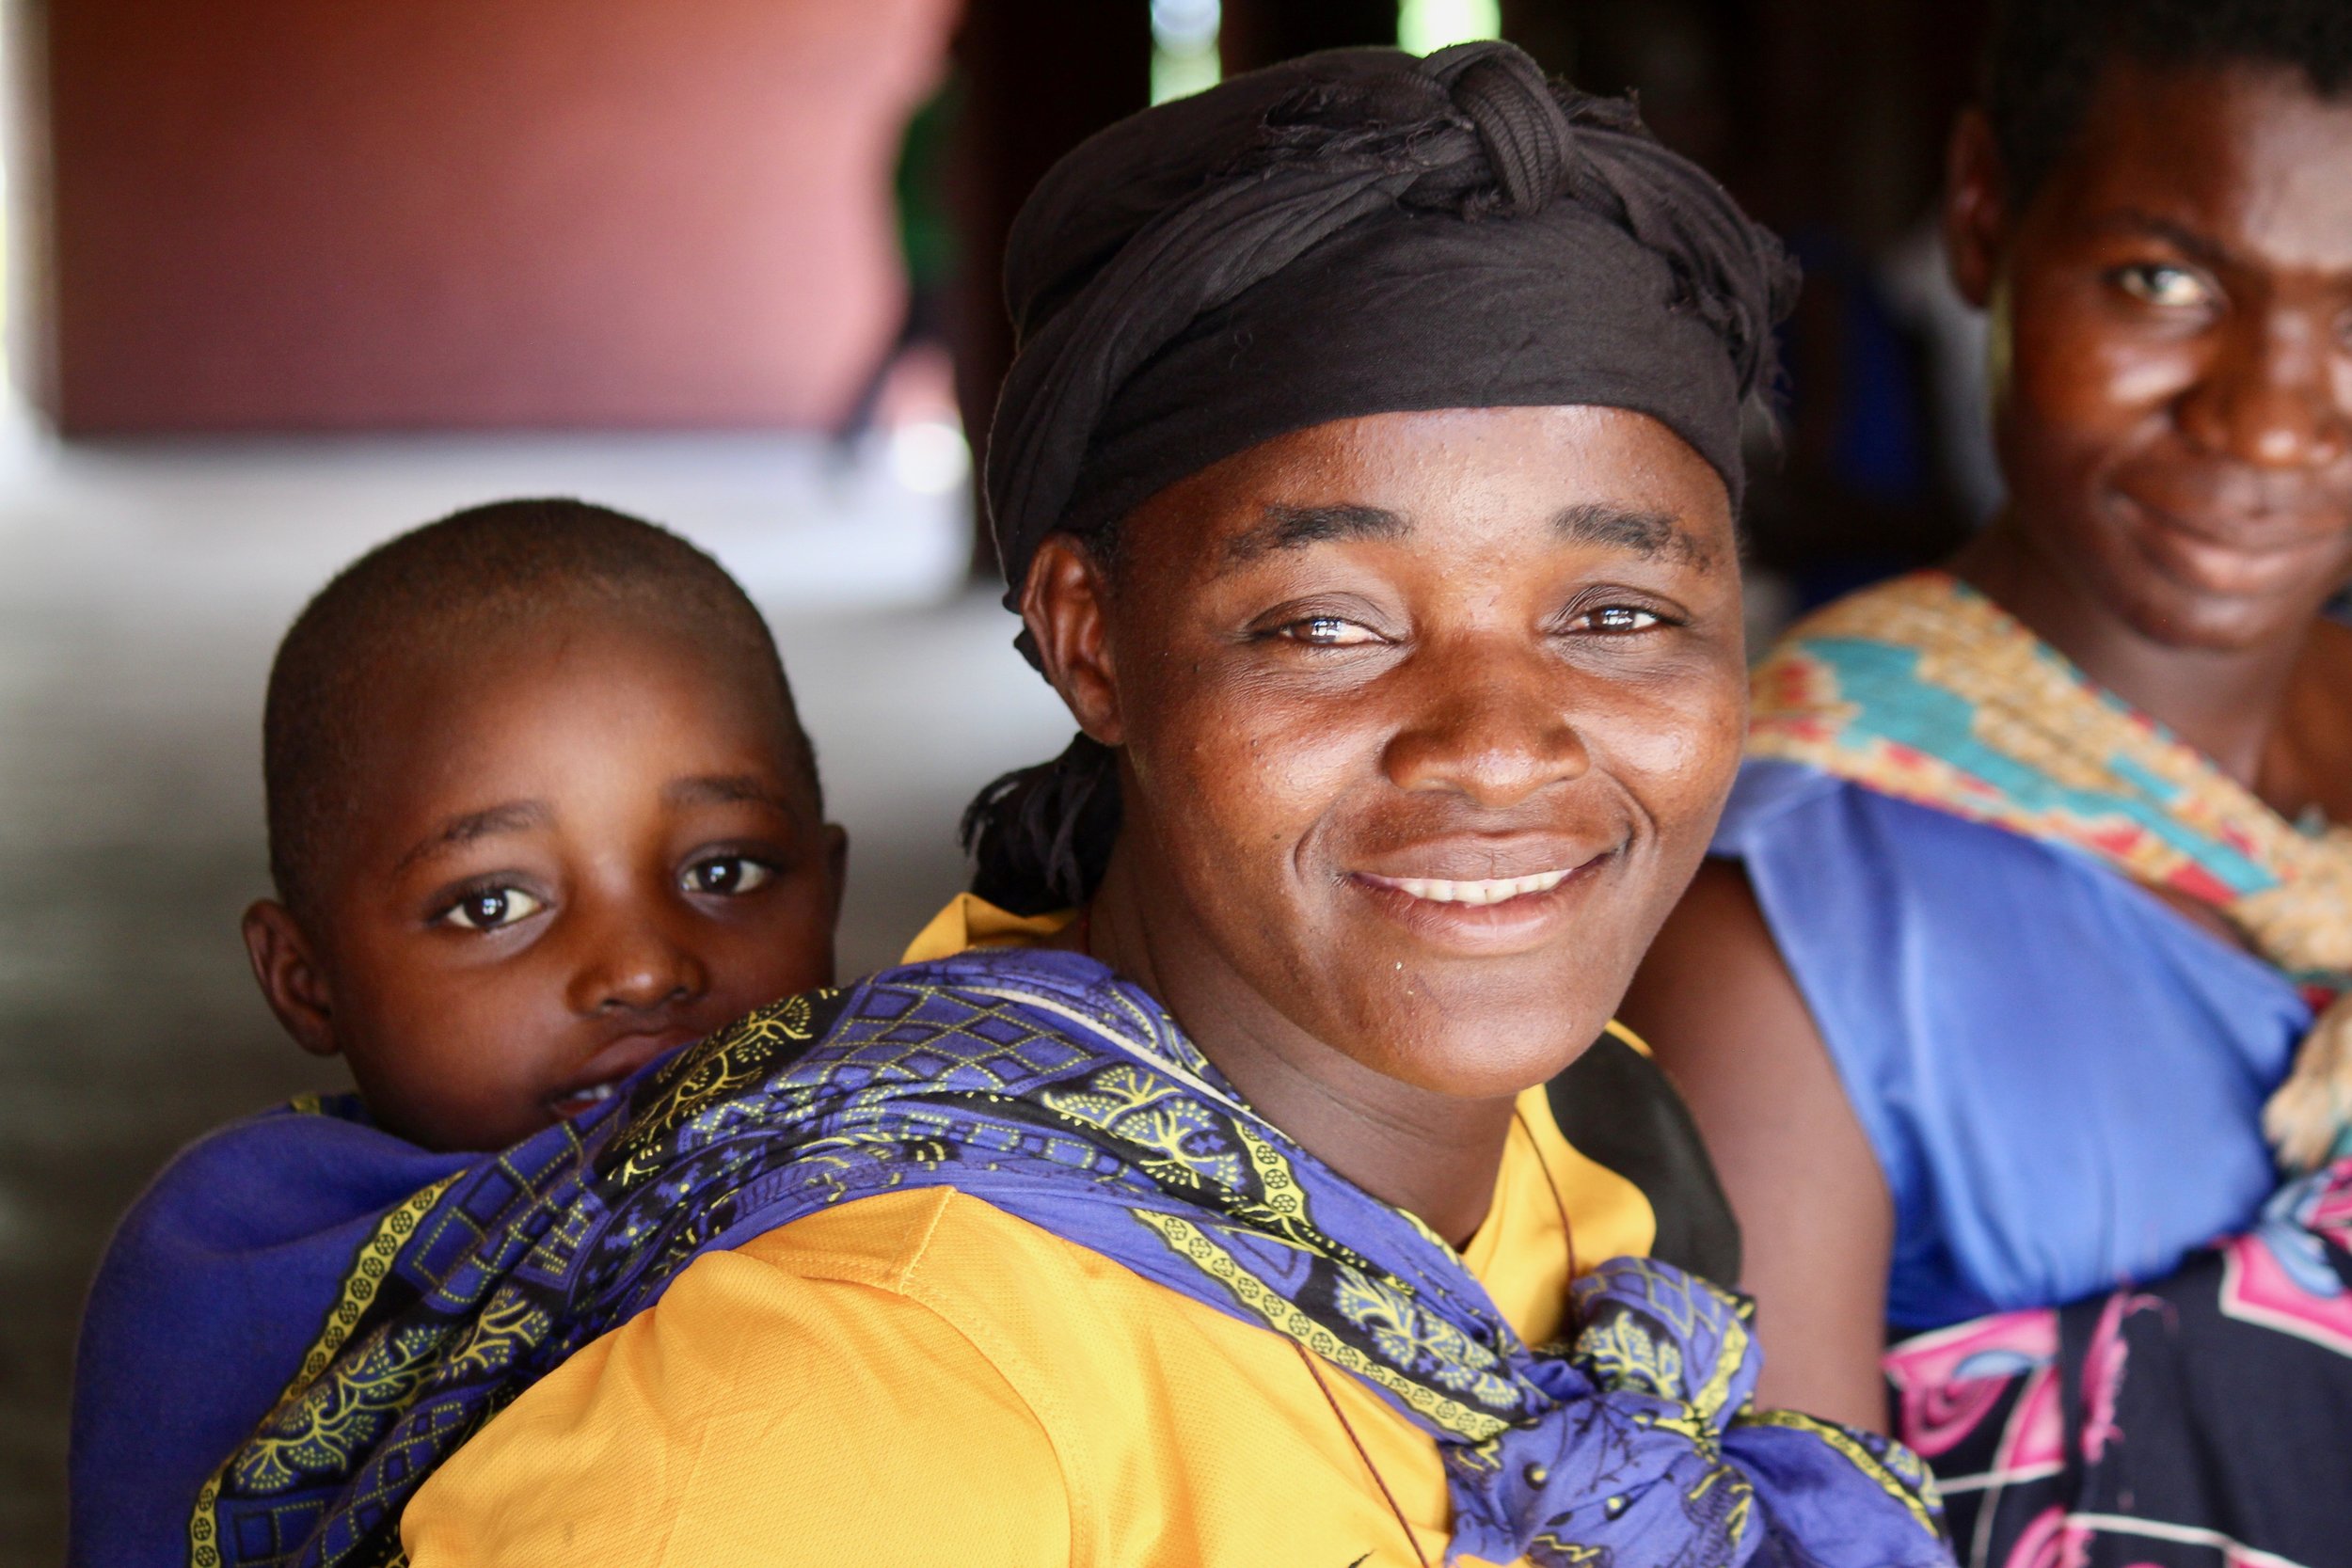 A mother and baby visit a clinic in Malawi. | Photo courtesy of Global Health Innovations.